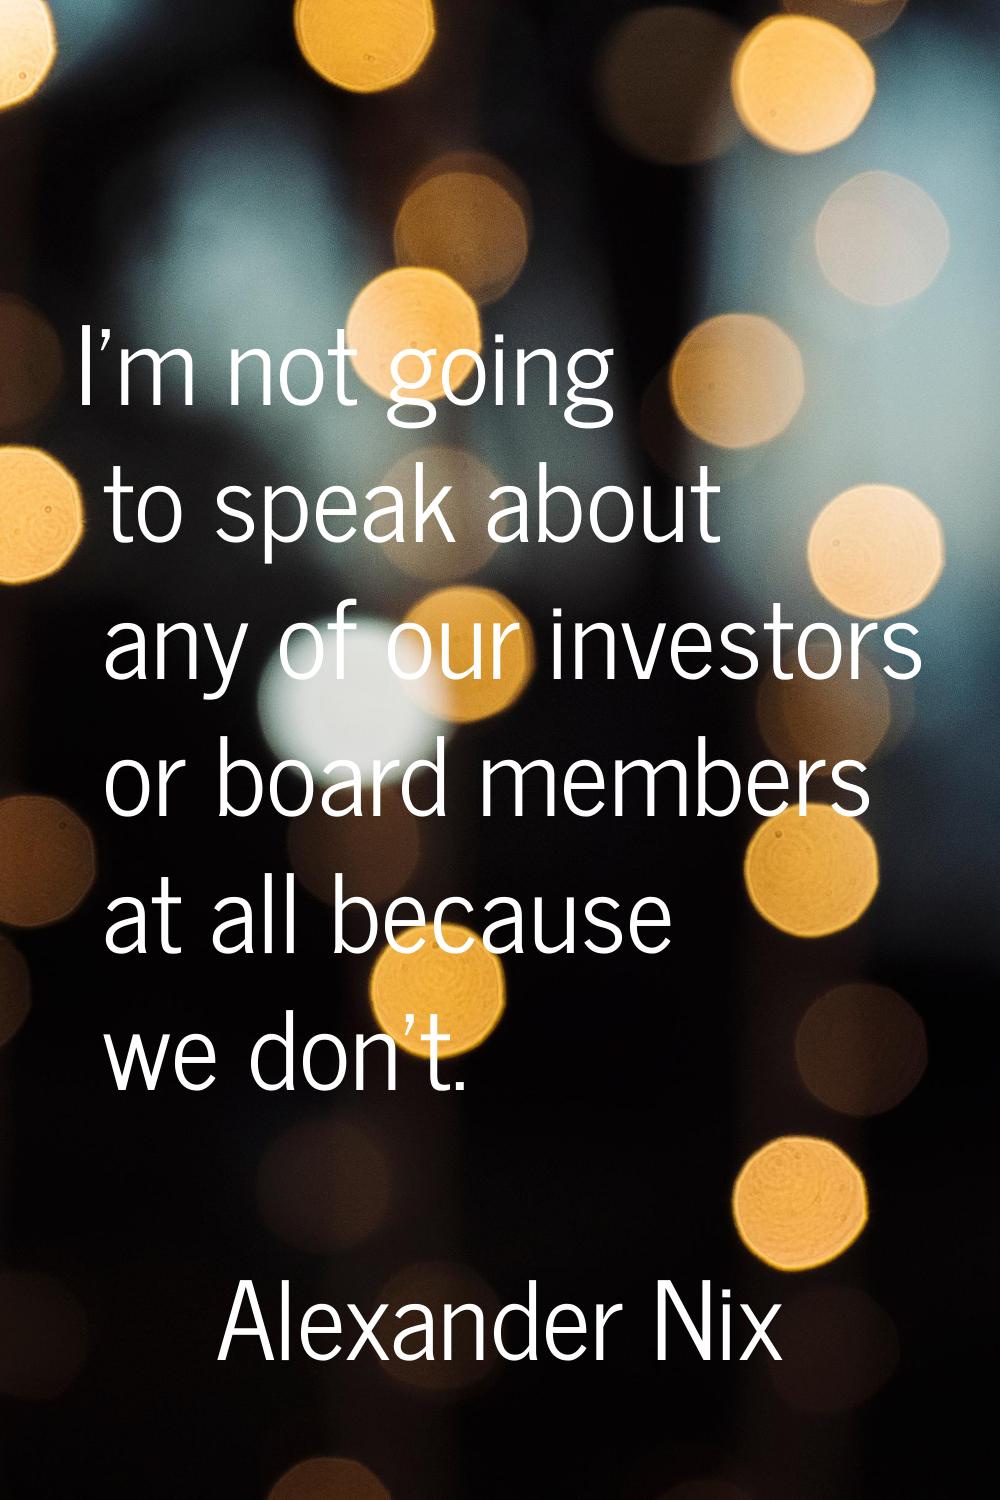 I'm not going to speak about any of our investors or board members at all because we don't.